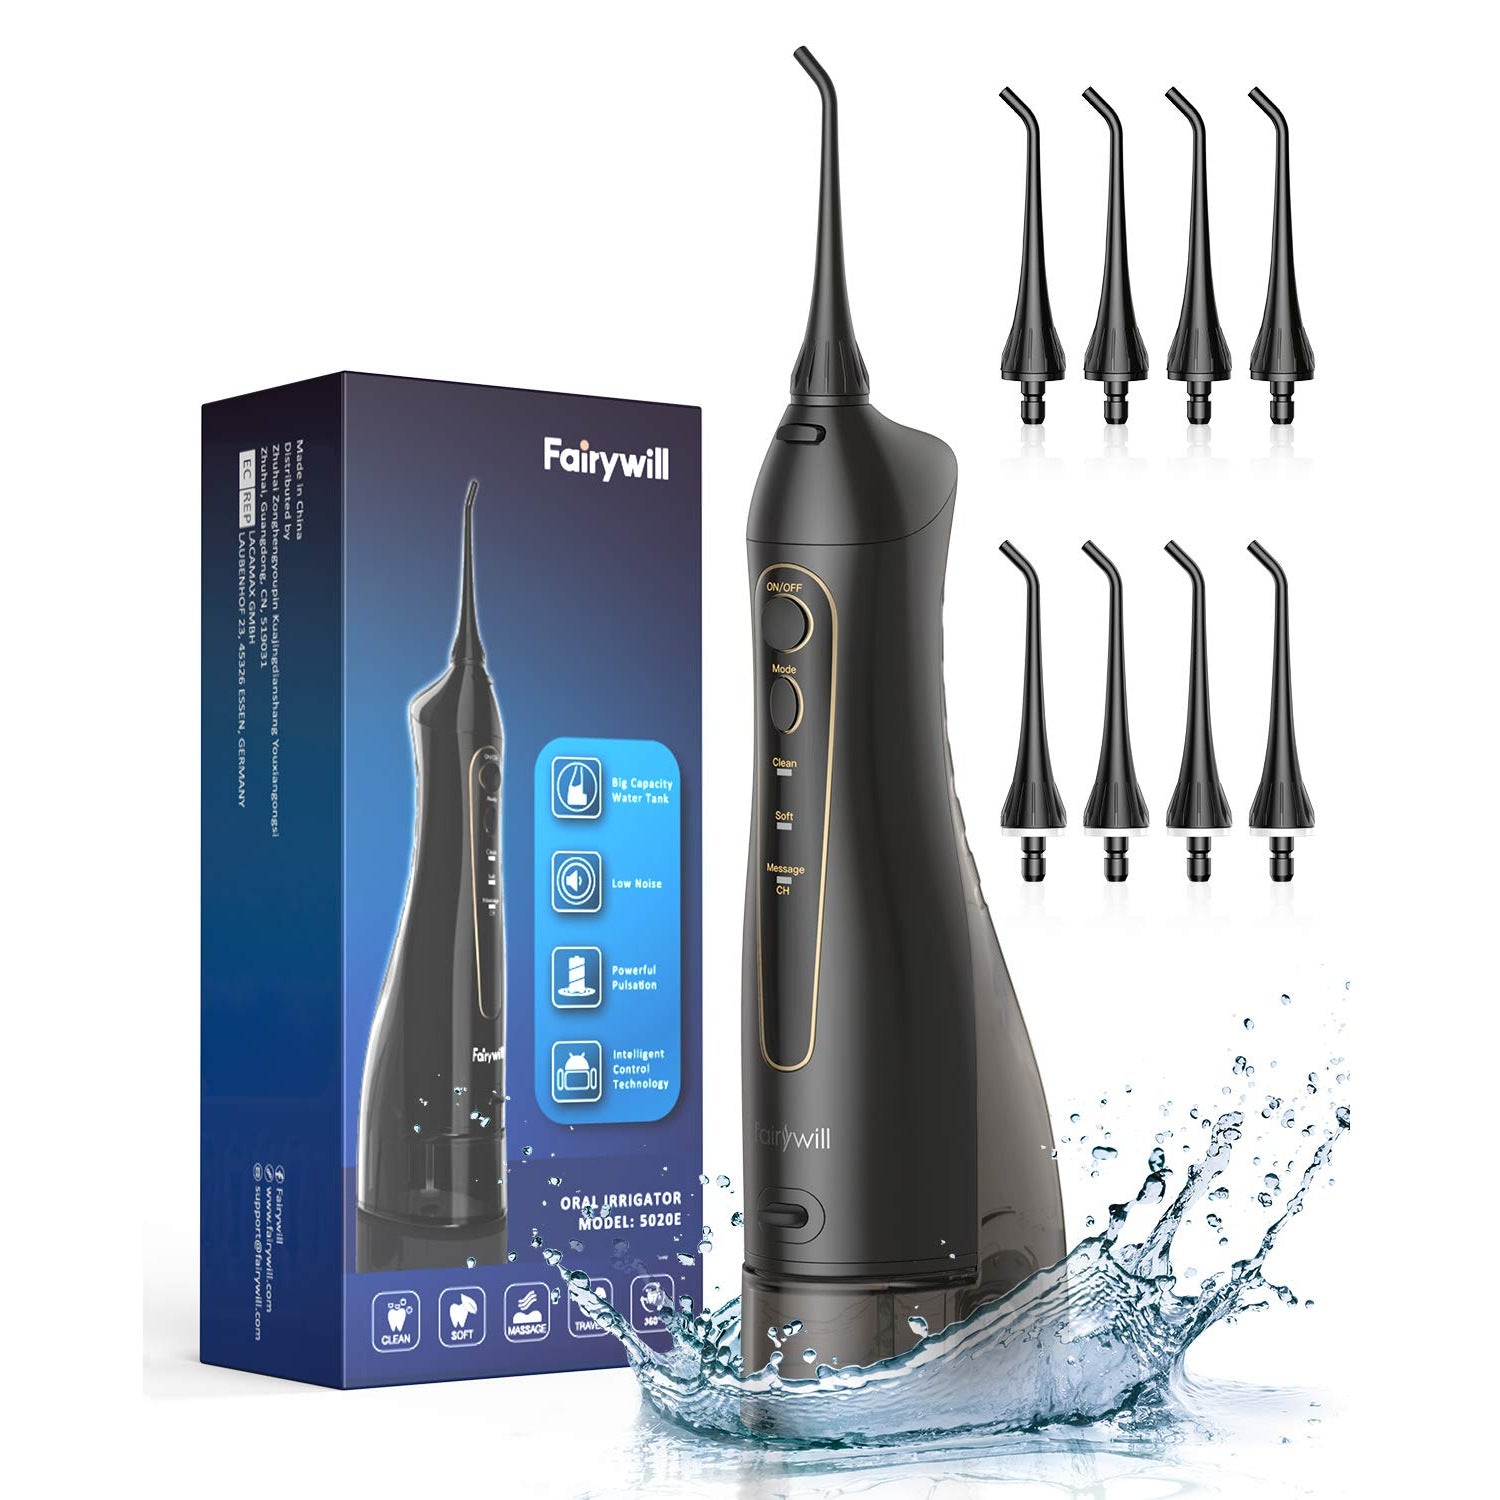 Fairywill 5020E Water flosser Professional Cordless Dental Oral Irrigator with 300ML Water Tank 3 Modes 8 Jet Tips - Almondscove